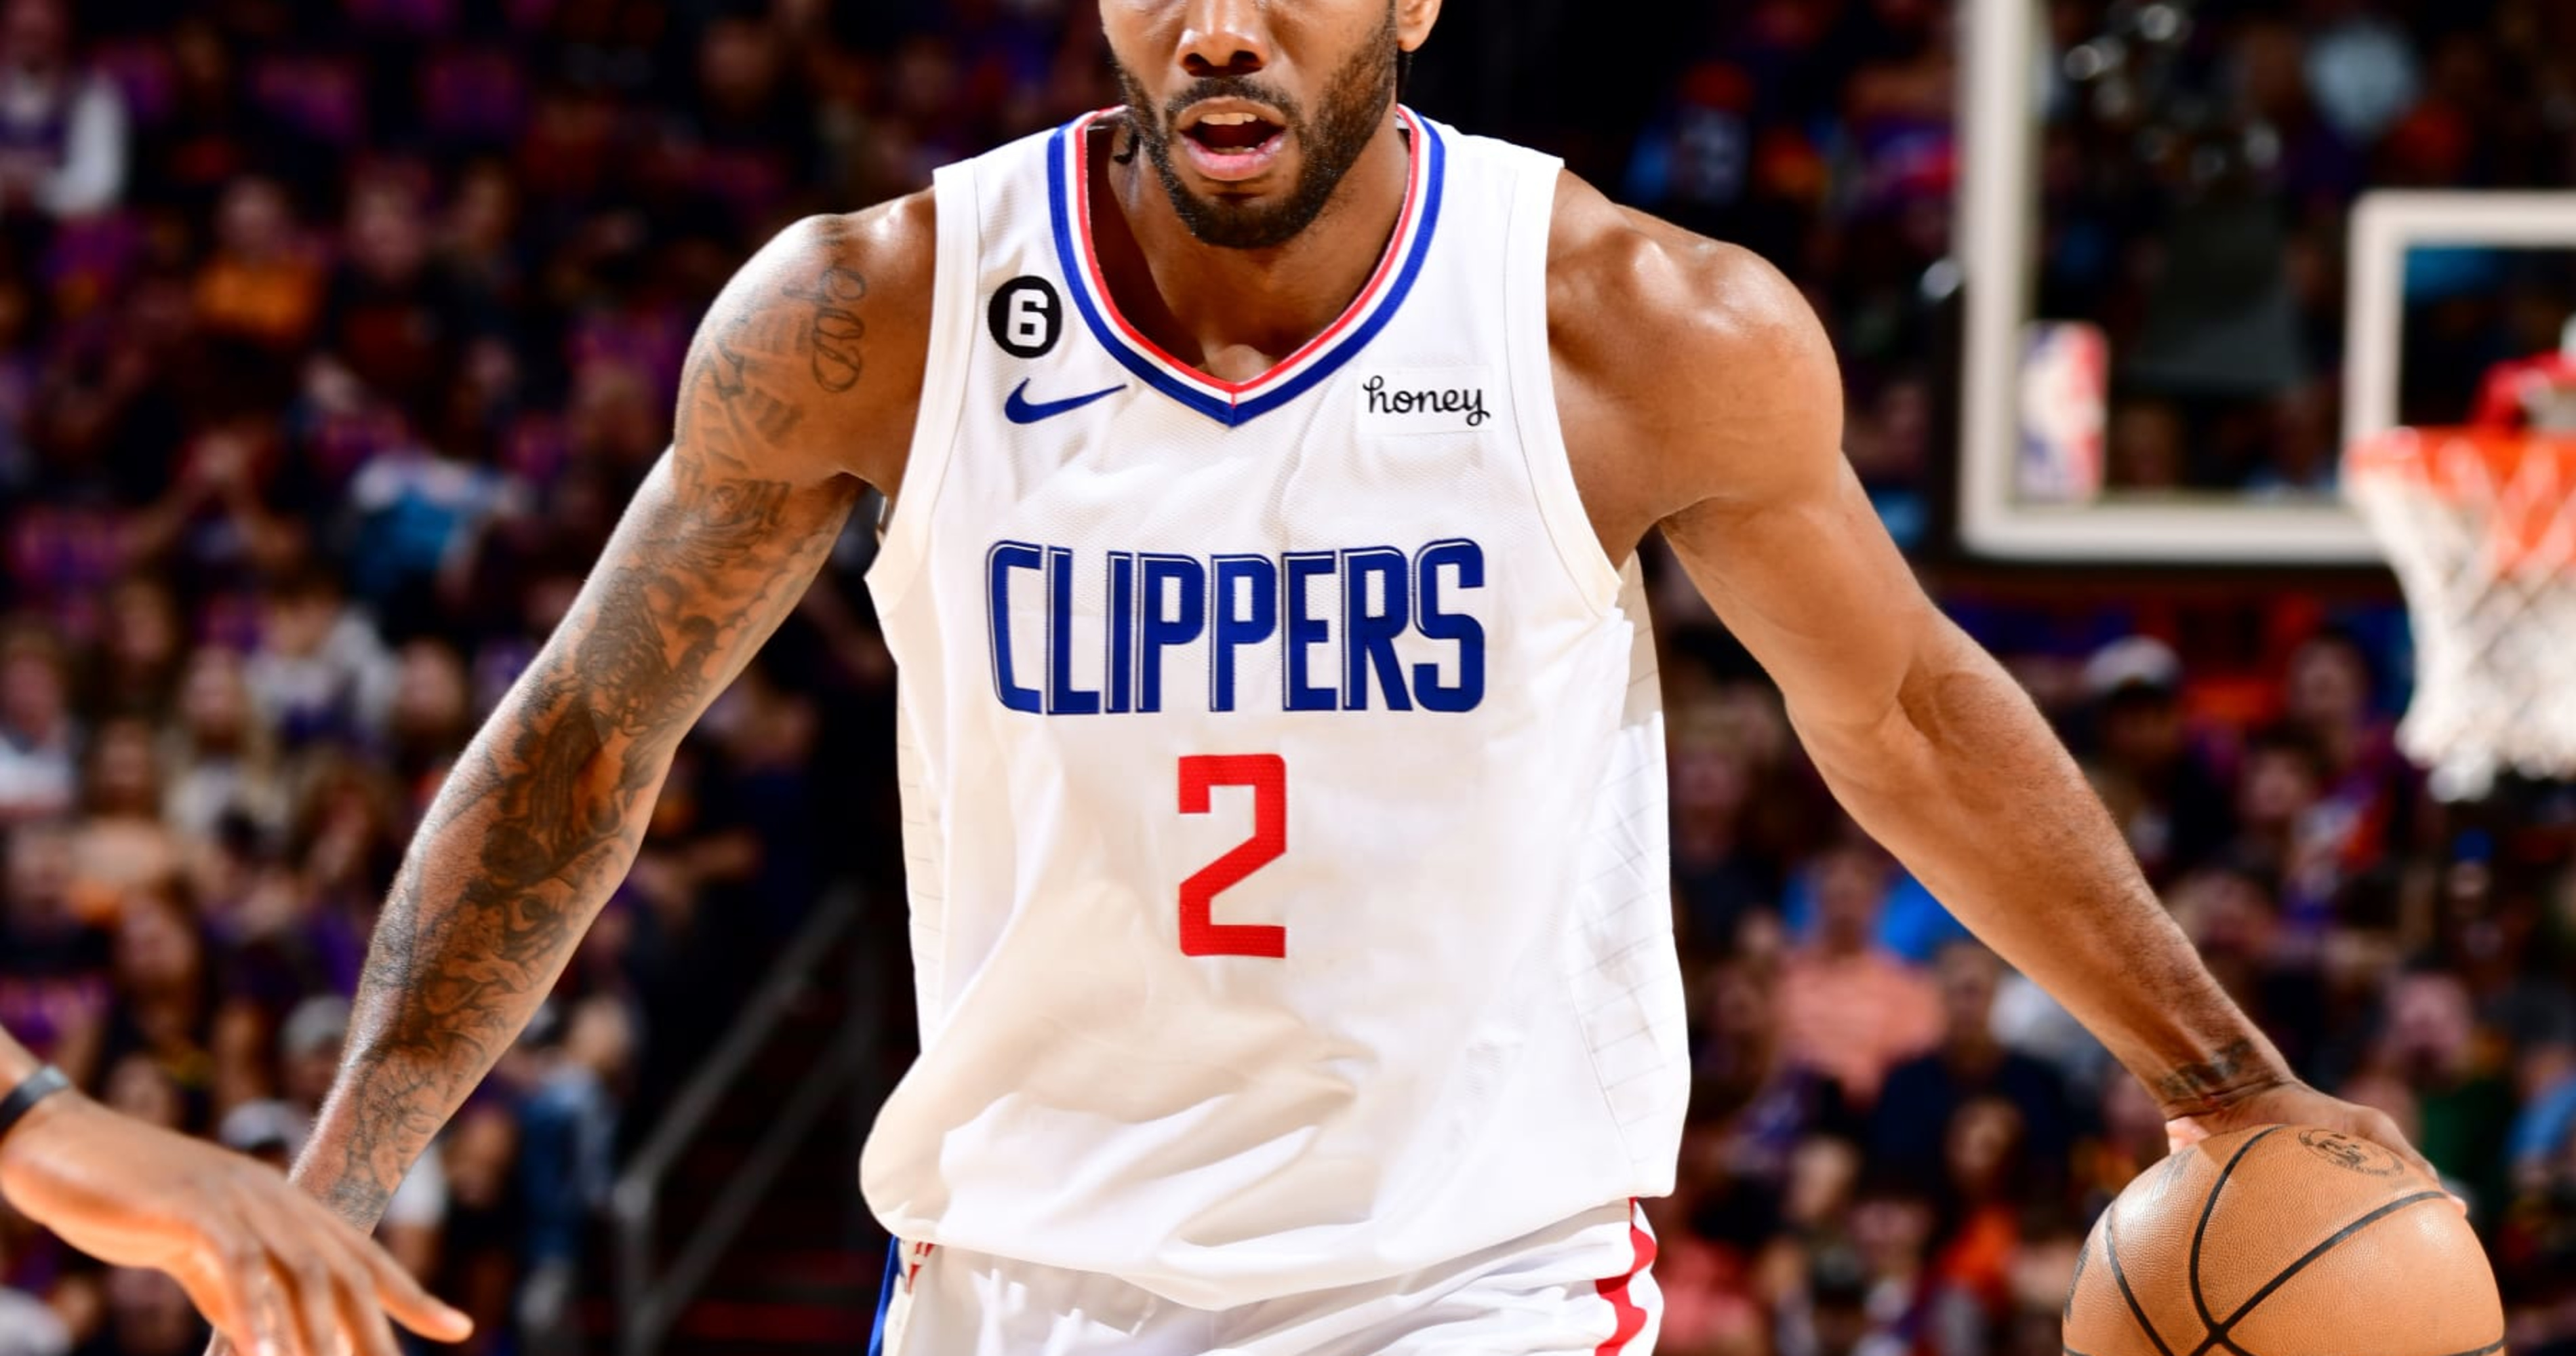 Clippers' Lue expects Leonard, George to be healthy for camp